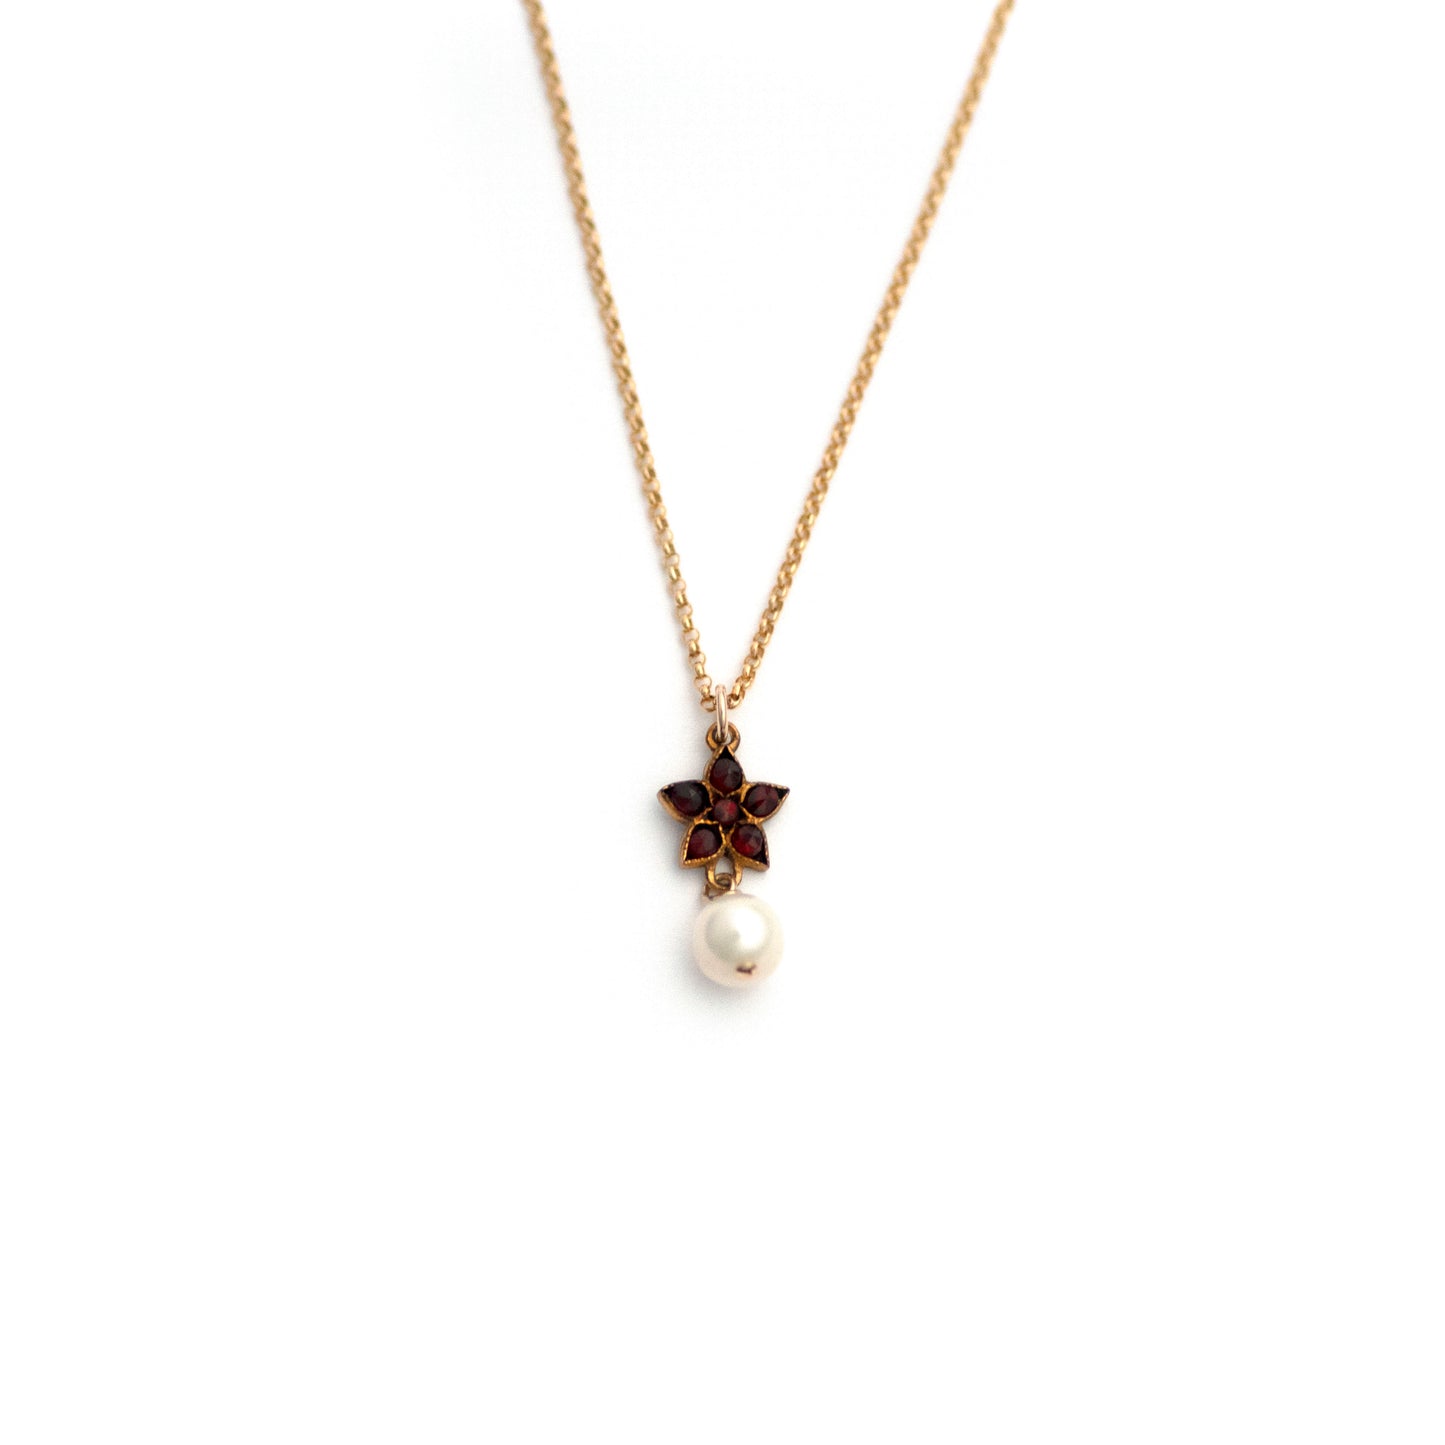 Celestial 5 Point Star Garnet and Pearl Necklace